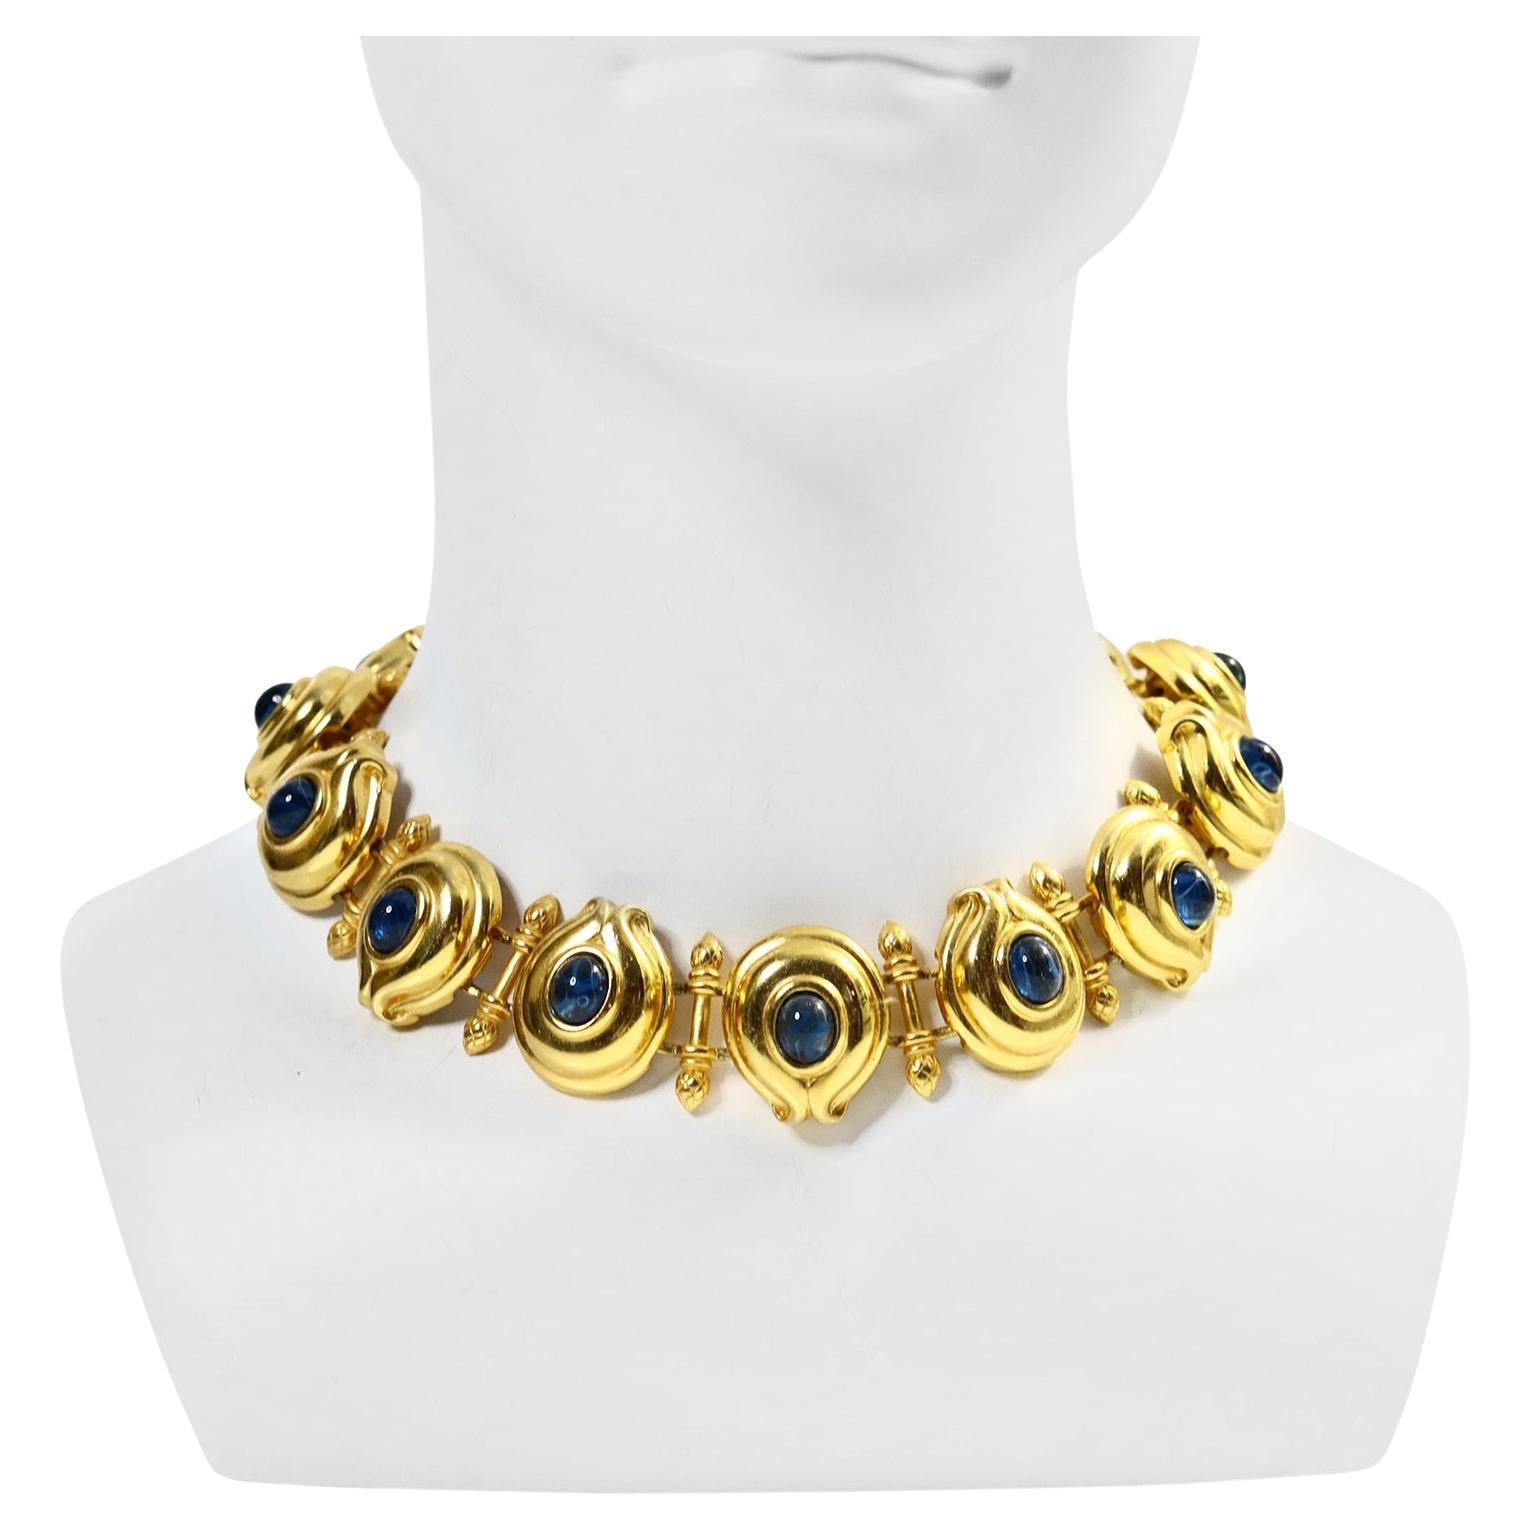 Vintage Fendi Gold Tone and Blue Cabochon Toggle Necklace Circa 1980s For Sale